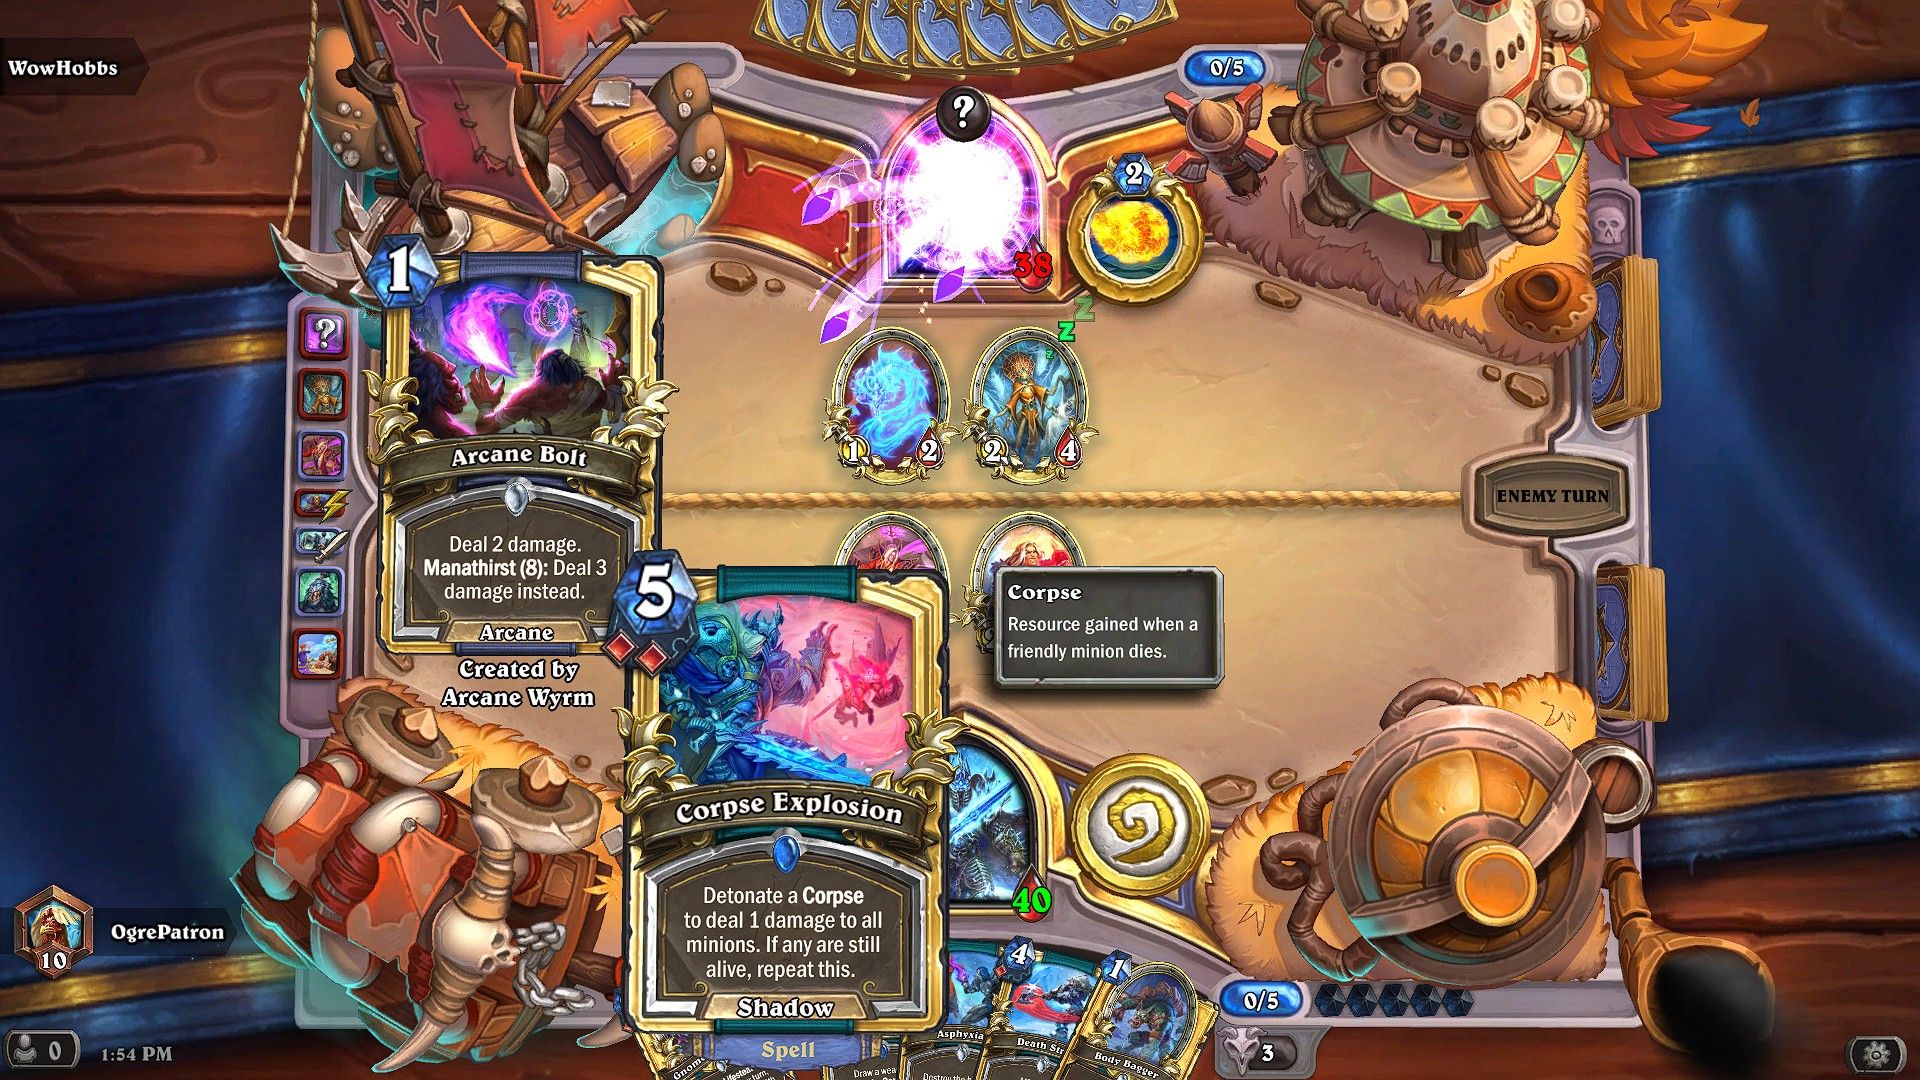 Hearthstone battle board with Arcane Bolt and Corpse Explosion cards highlighted, Arcane Bolt is being cast.